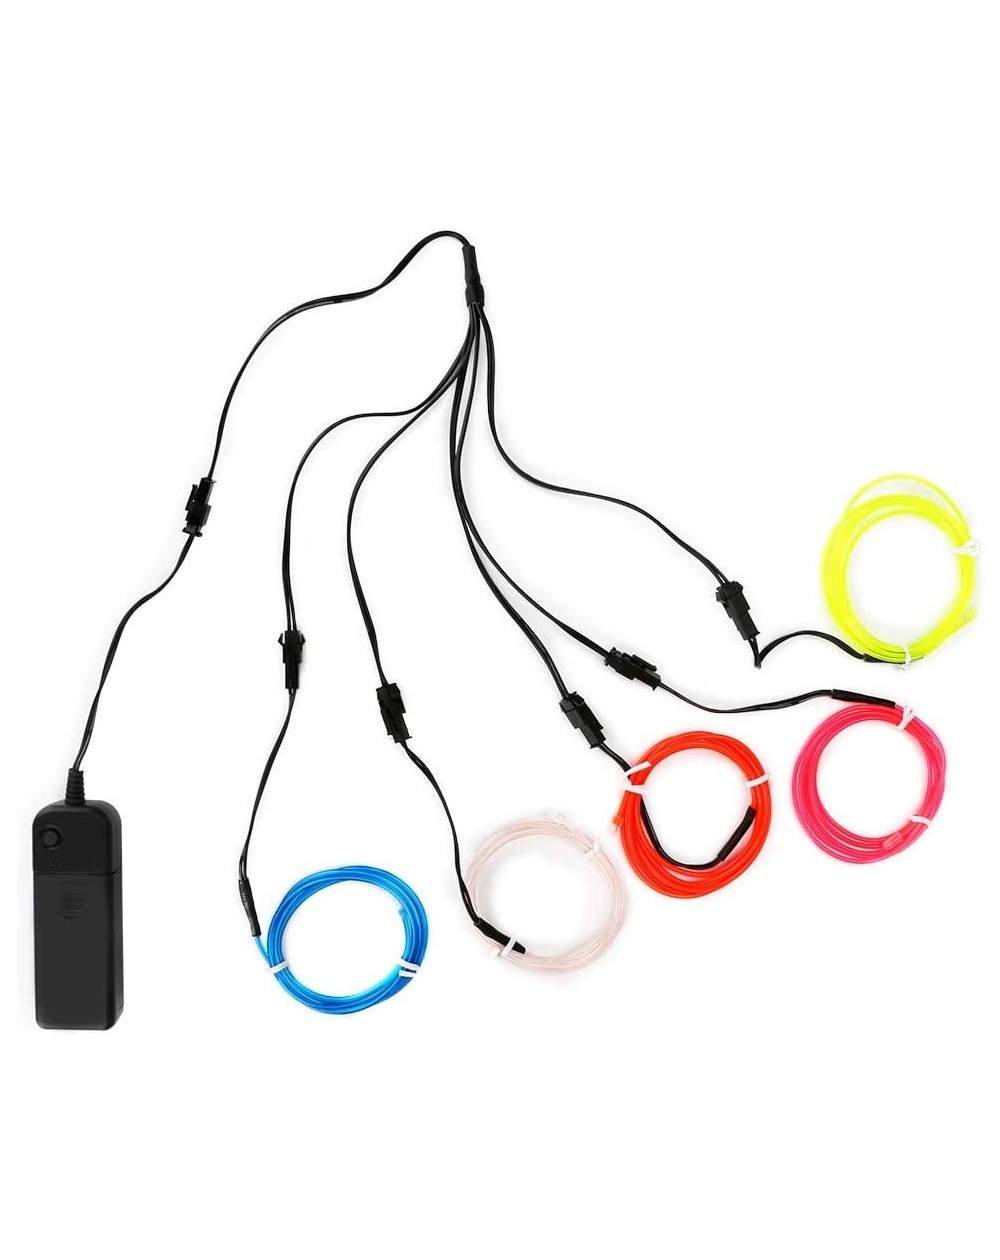 Rope Lights EL Wire Kit- Portable Neon EL Wire Lights with AA Battery Inverter- EL Wire Ice Lights 5 by 1 Meter for Halloween...